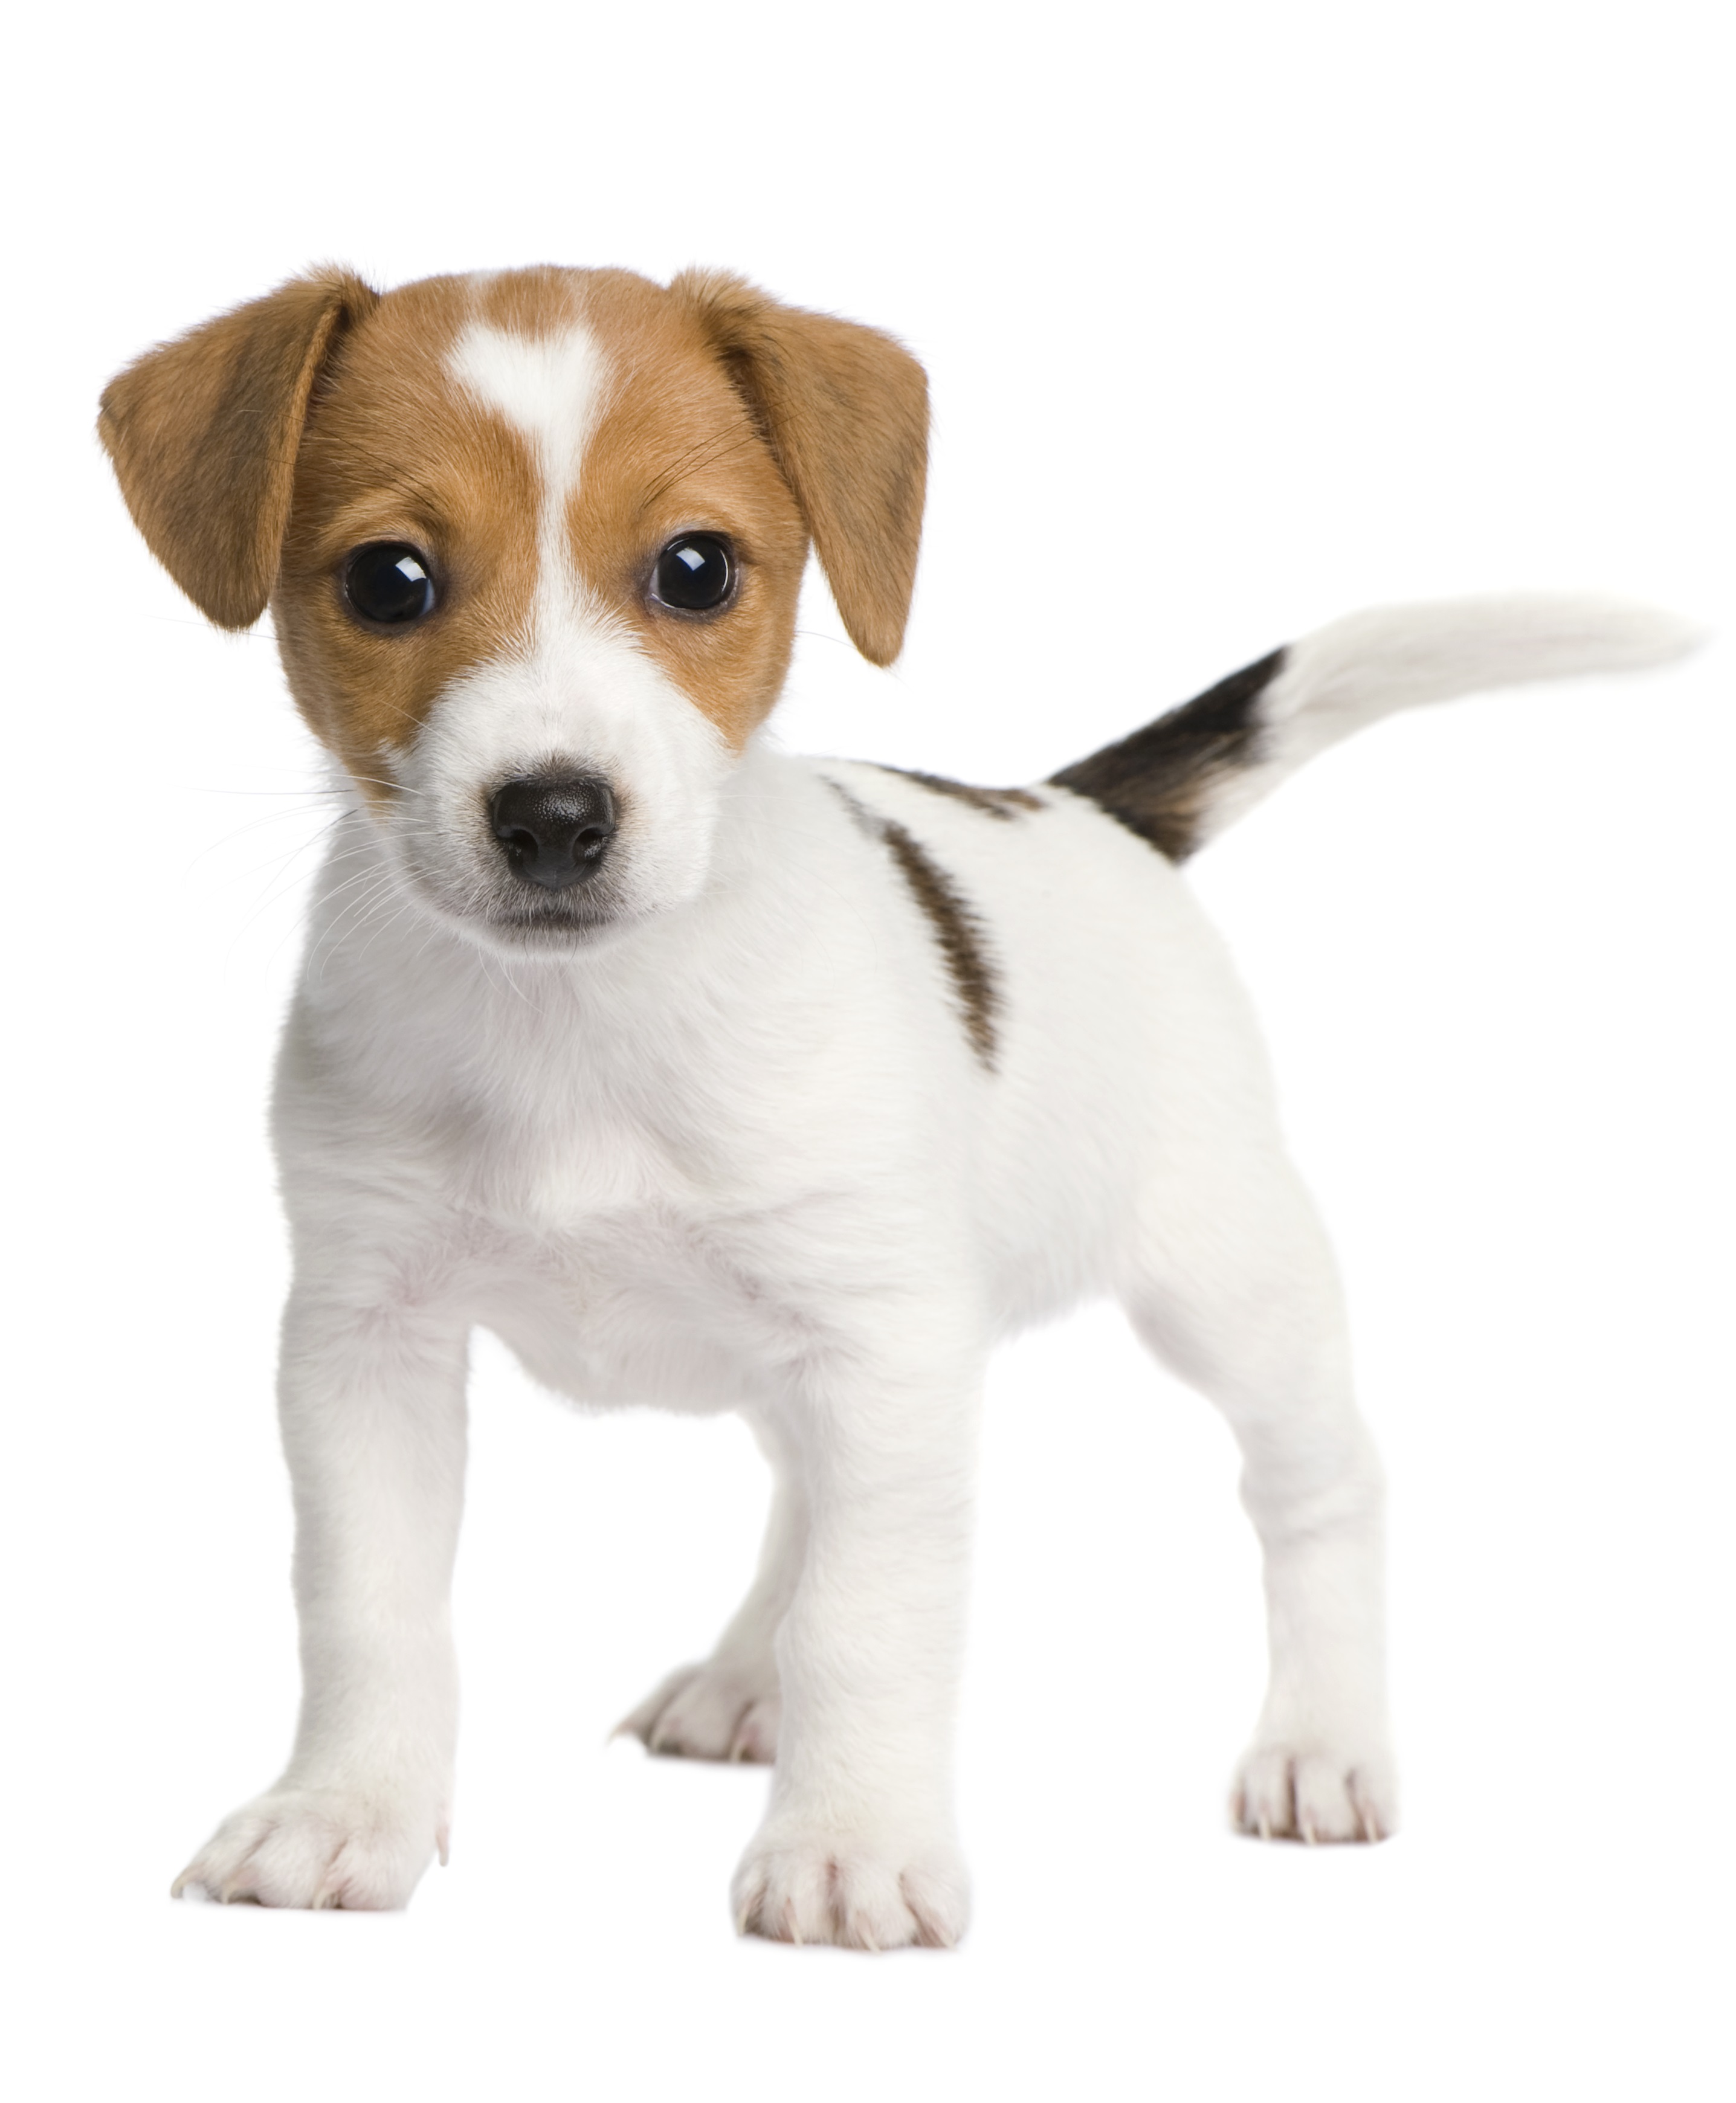 Jack Russell Terrier Puppies Breed information & Puppies for Sale